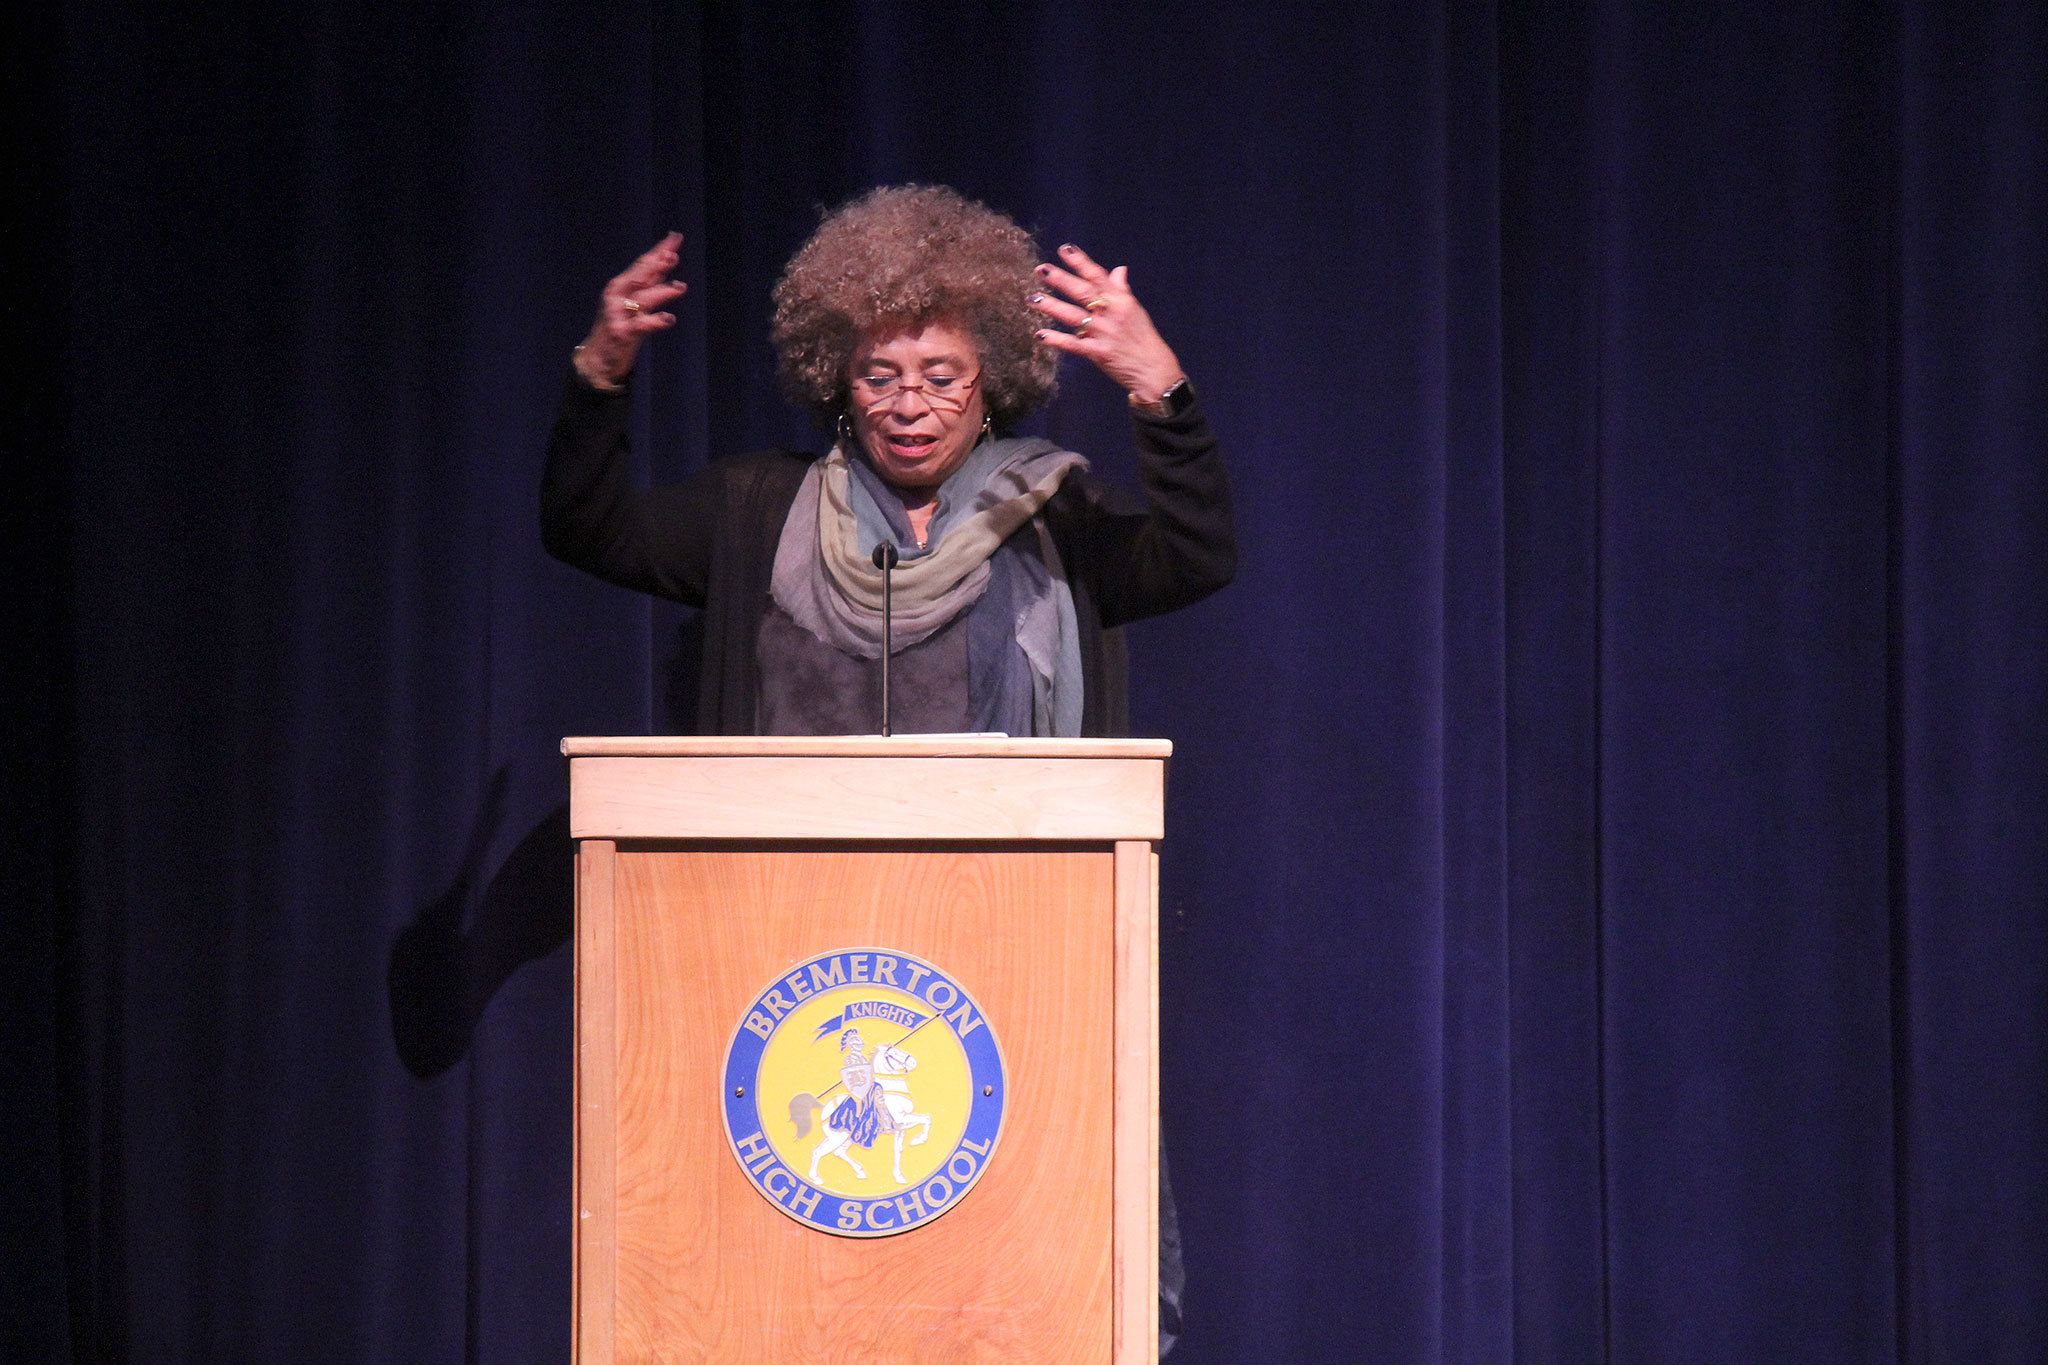 Dr. Angela Davis, a civil rights activist, spoke at OC’s inaugural event for its Presidential Equity and Excellence series, helmed by OC President Dr. David Mitchell and Equity and Inclusion Vice President Cheryl Nuñez. Michelle Beahm / Kitsap News Group